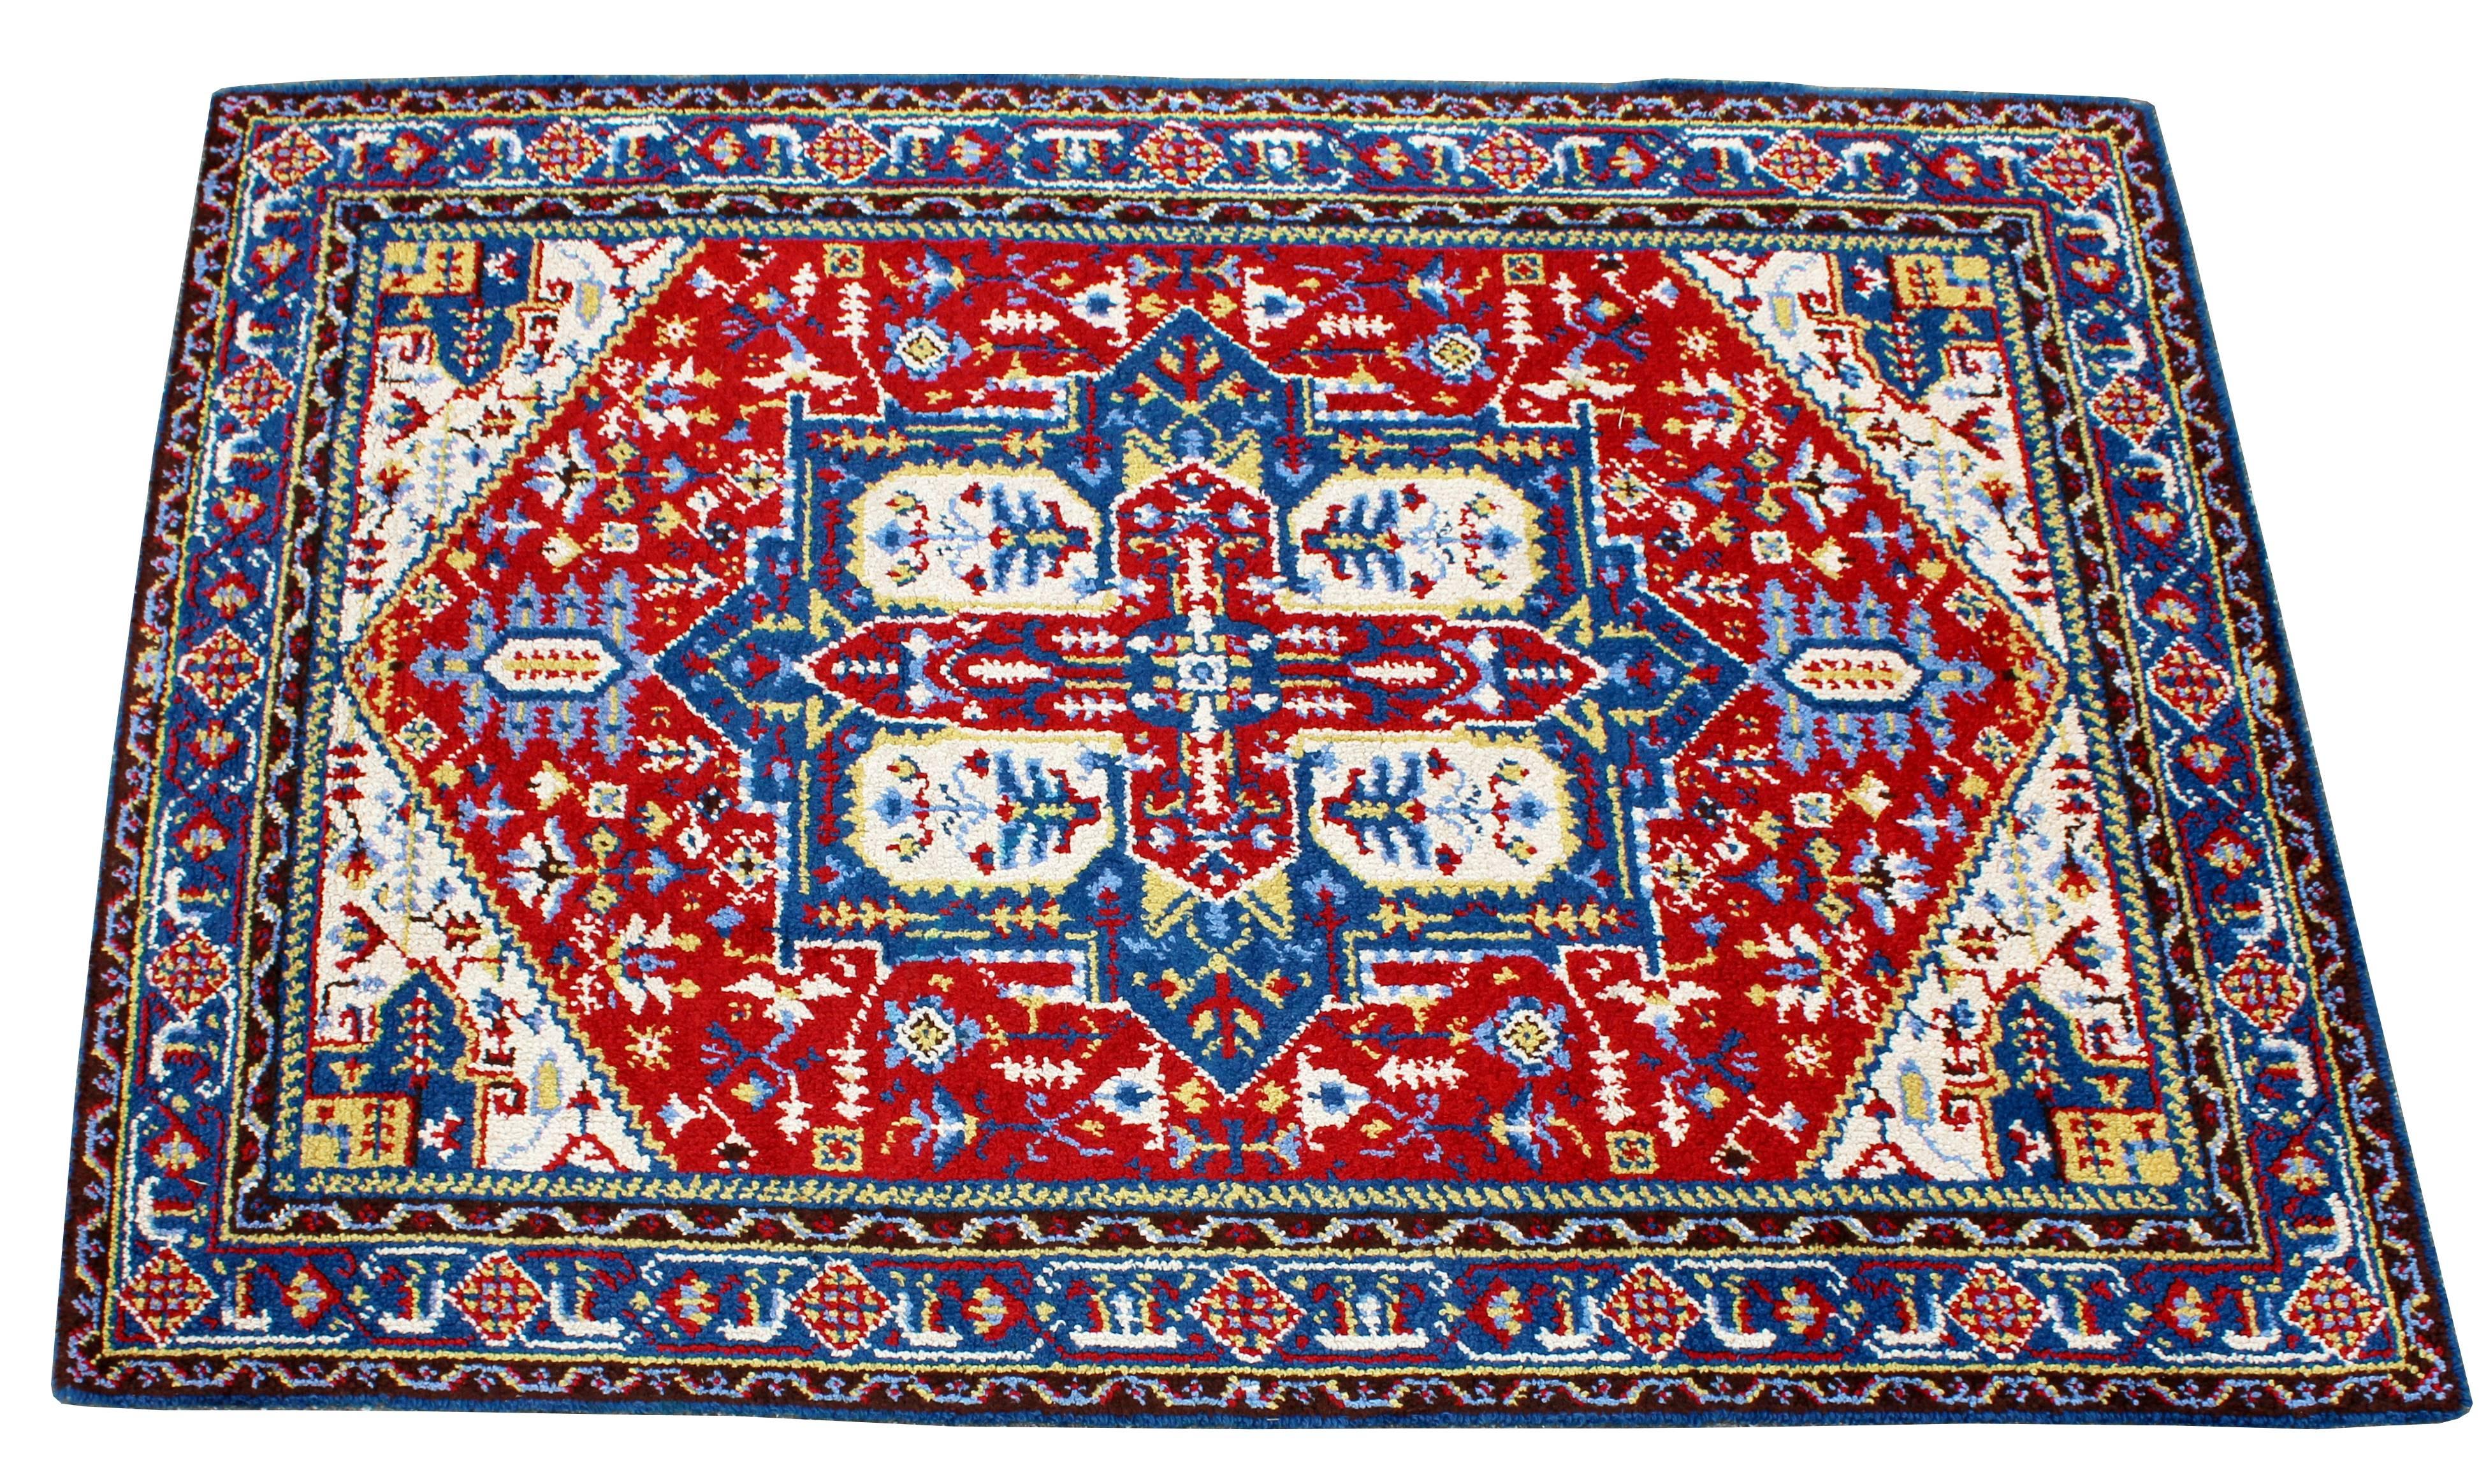 For your consideration is a beautiful, hand-knotted, rectangular area rug. In excellent condition. The dimensions are 76